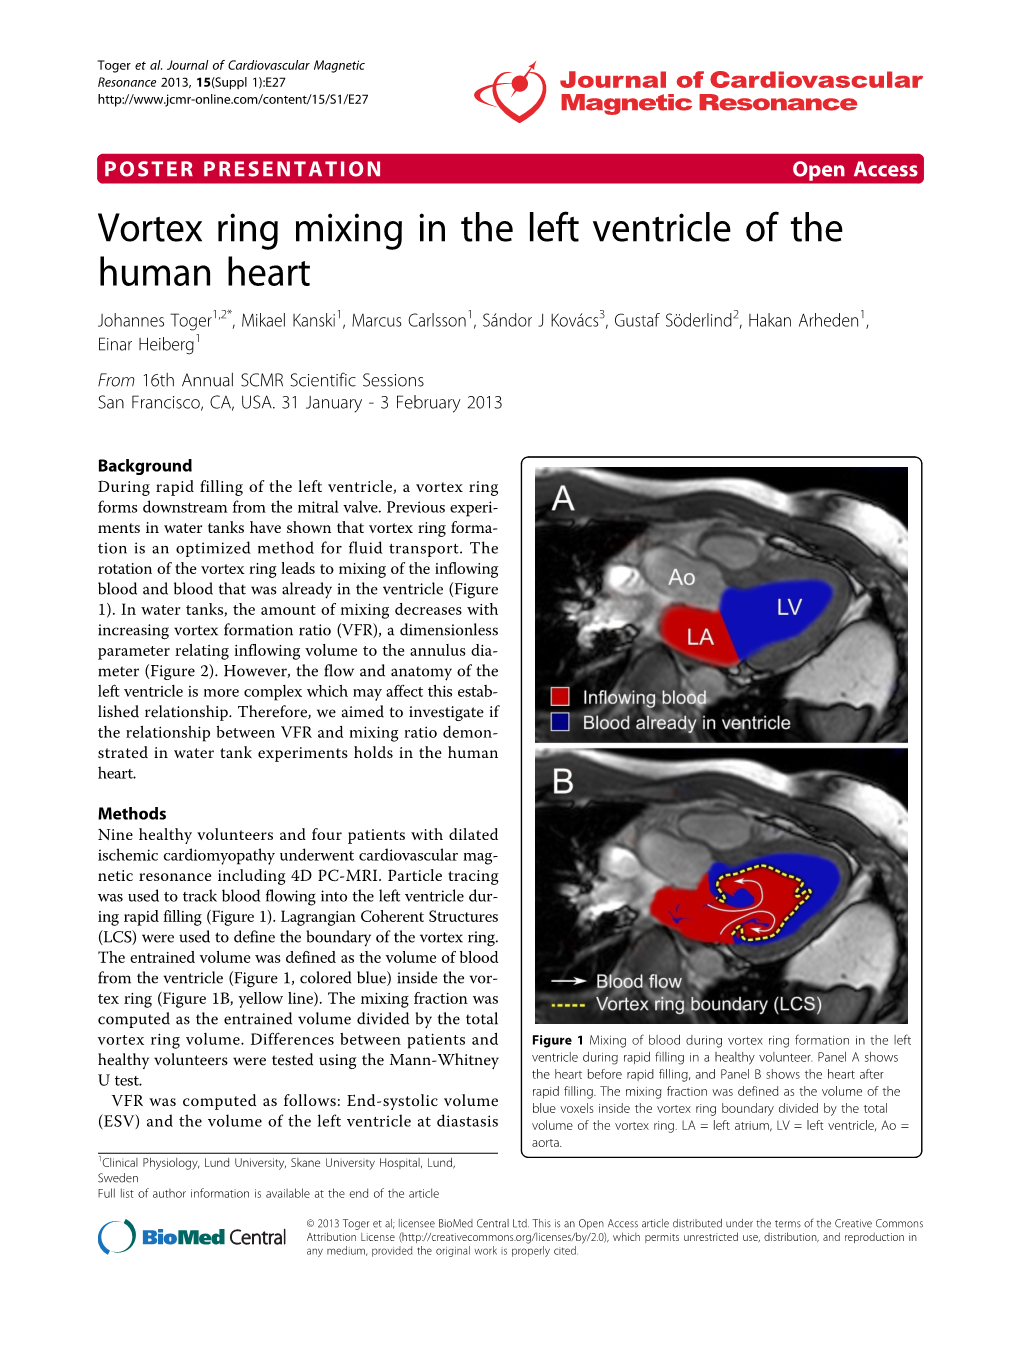 Vortex Ring Mixing in the Left Ventricle of the Human Heart